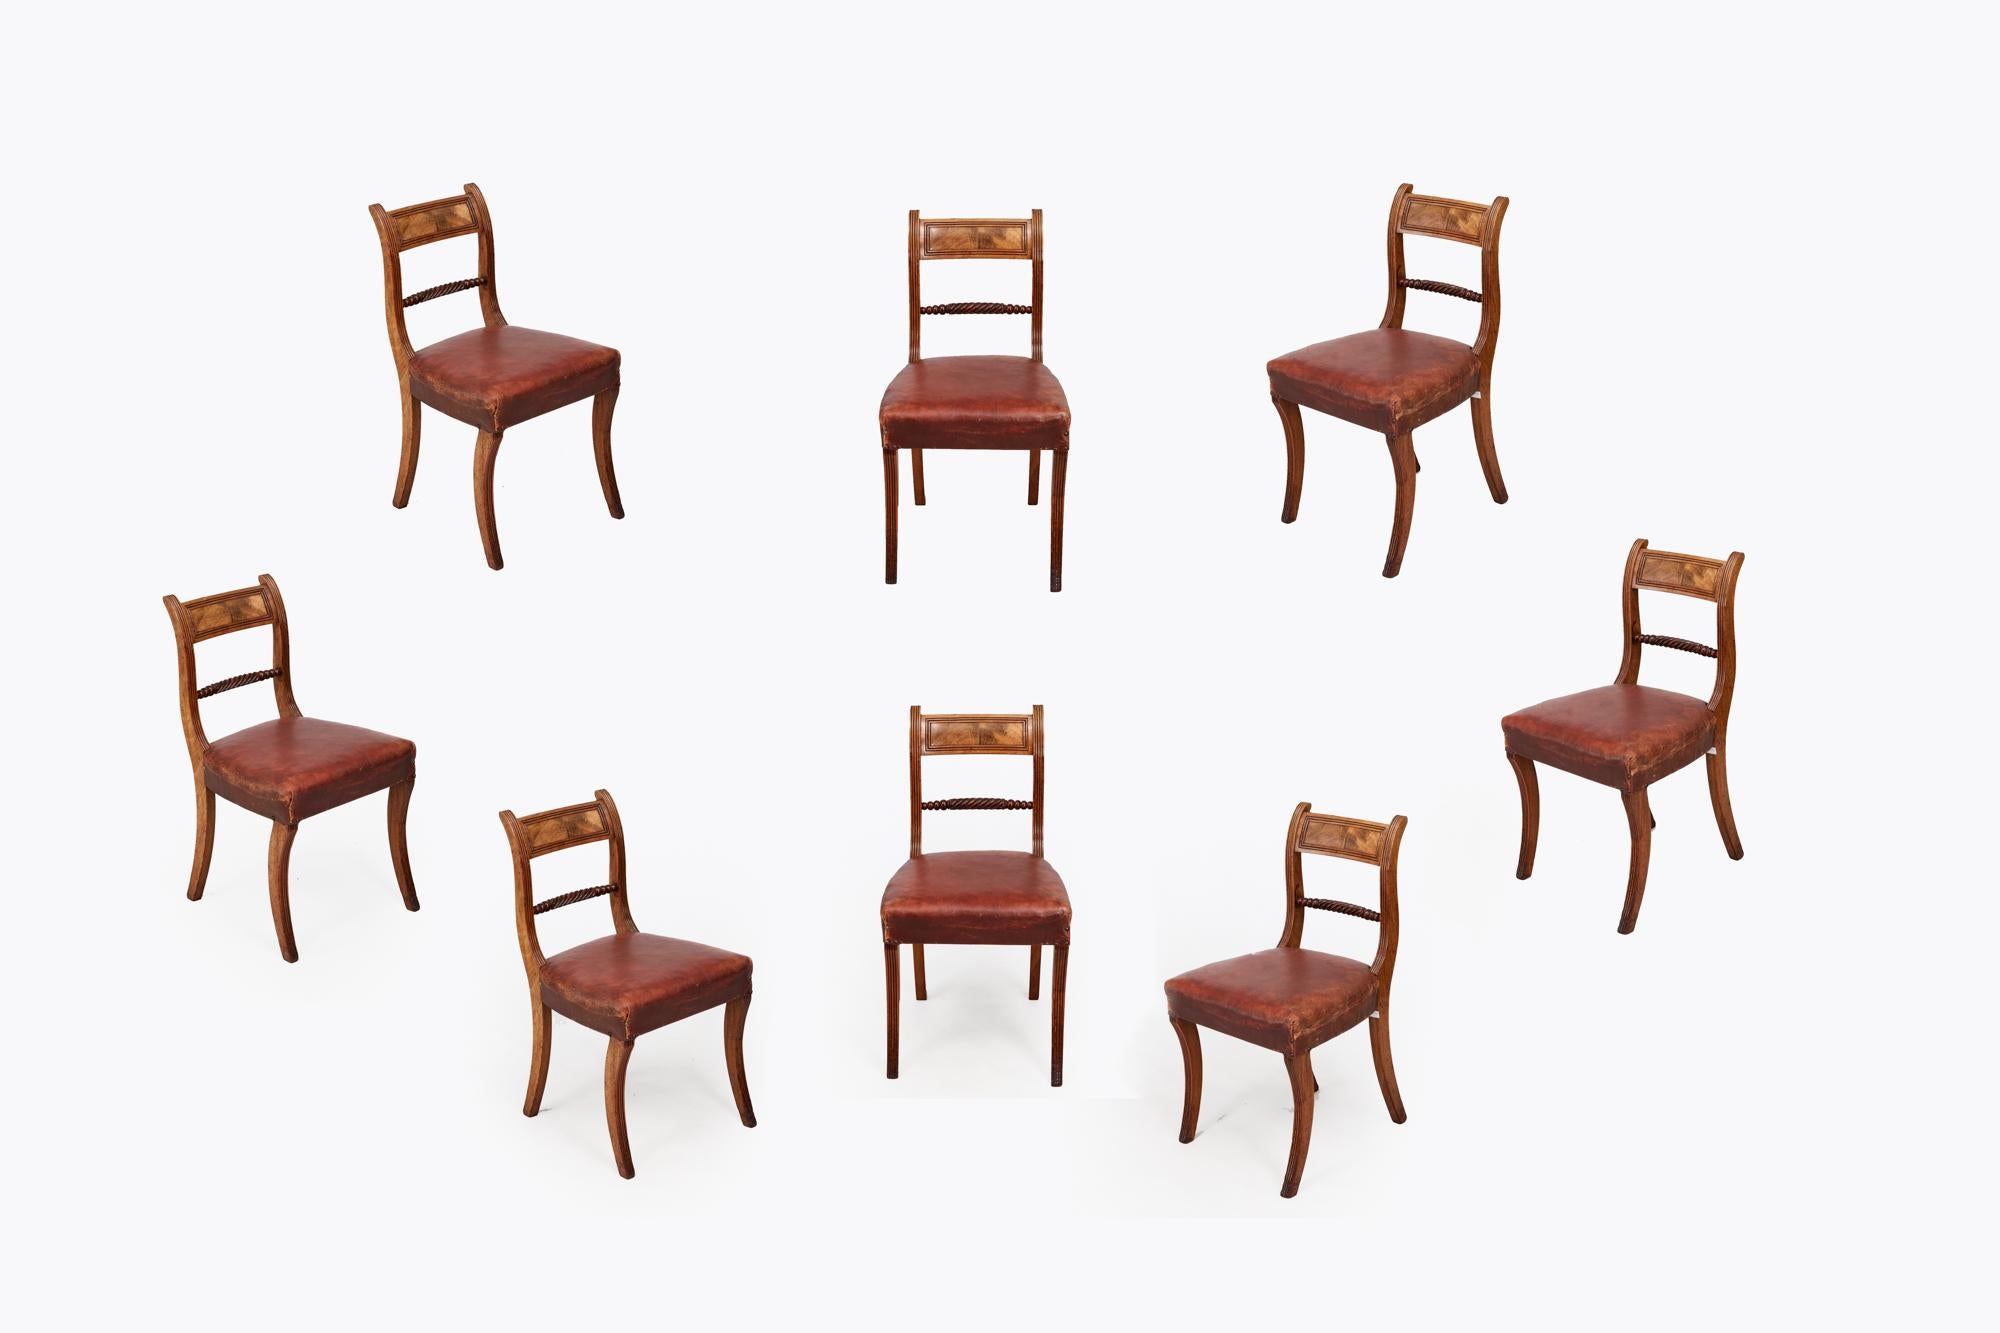 19th Century set of eight Regency period dining chairs in light mahogany with enclosed bar backs and ropetwist centre rails. The seats are covered in leather, which has a well aged patina, and all eight sit on sabre legs to the front and rear.